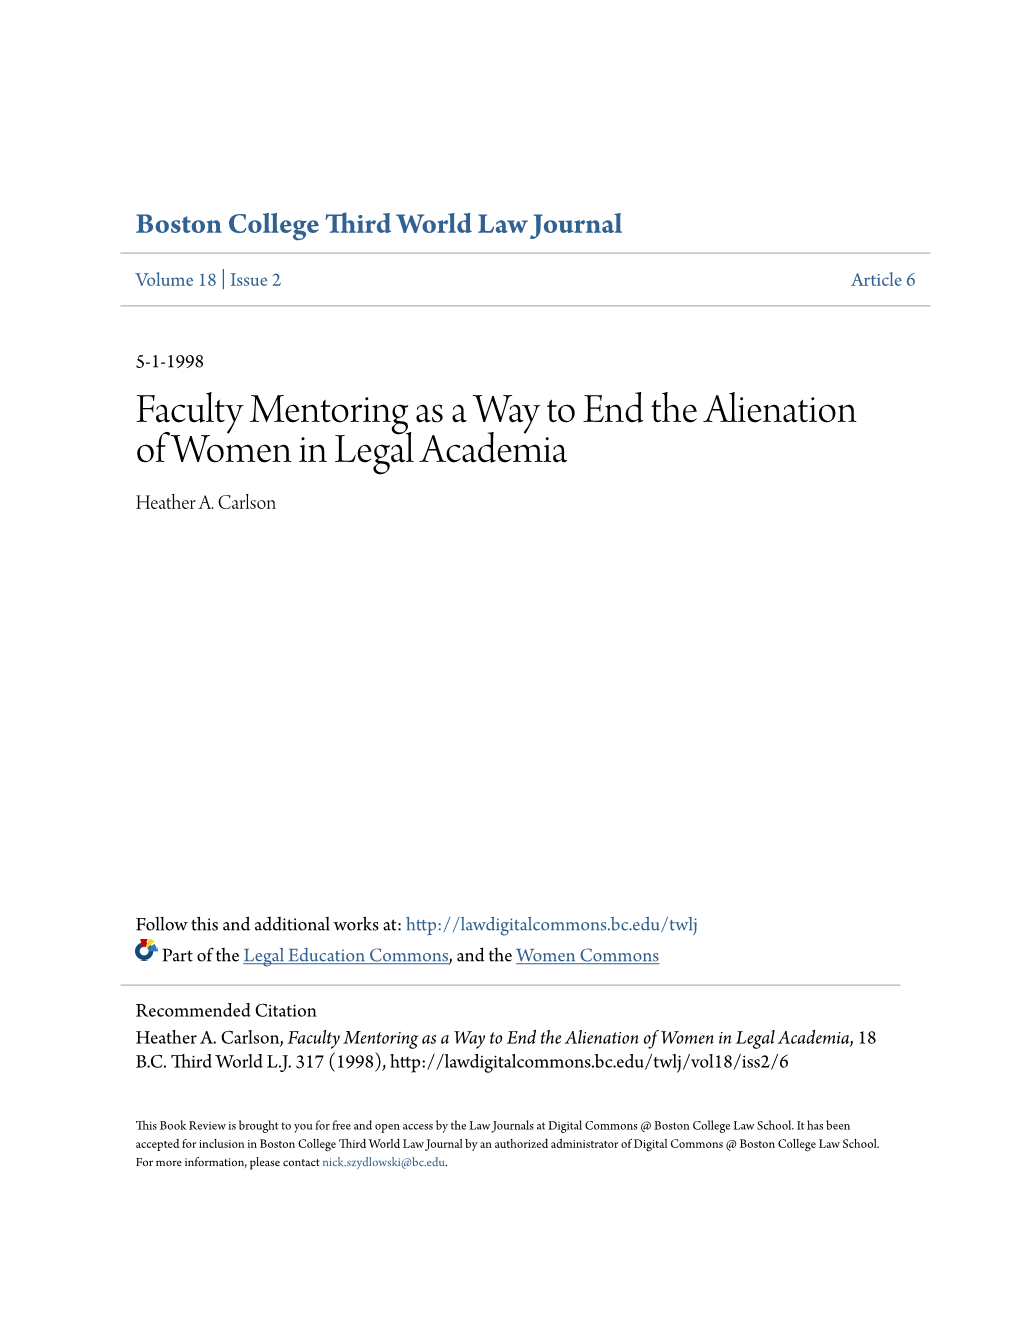 Faculty Mentoring As a Way to End the Alienation of Women in Legal Academia Heather A